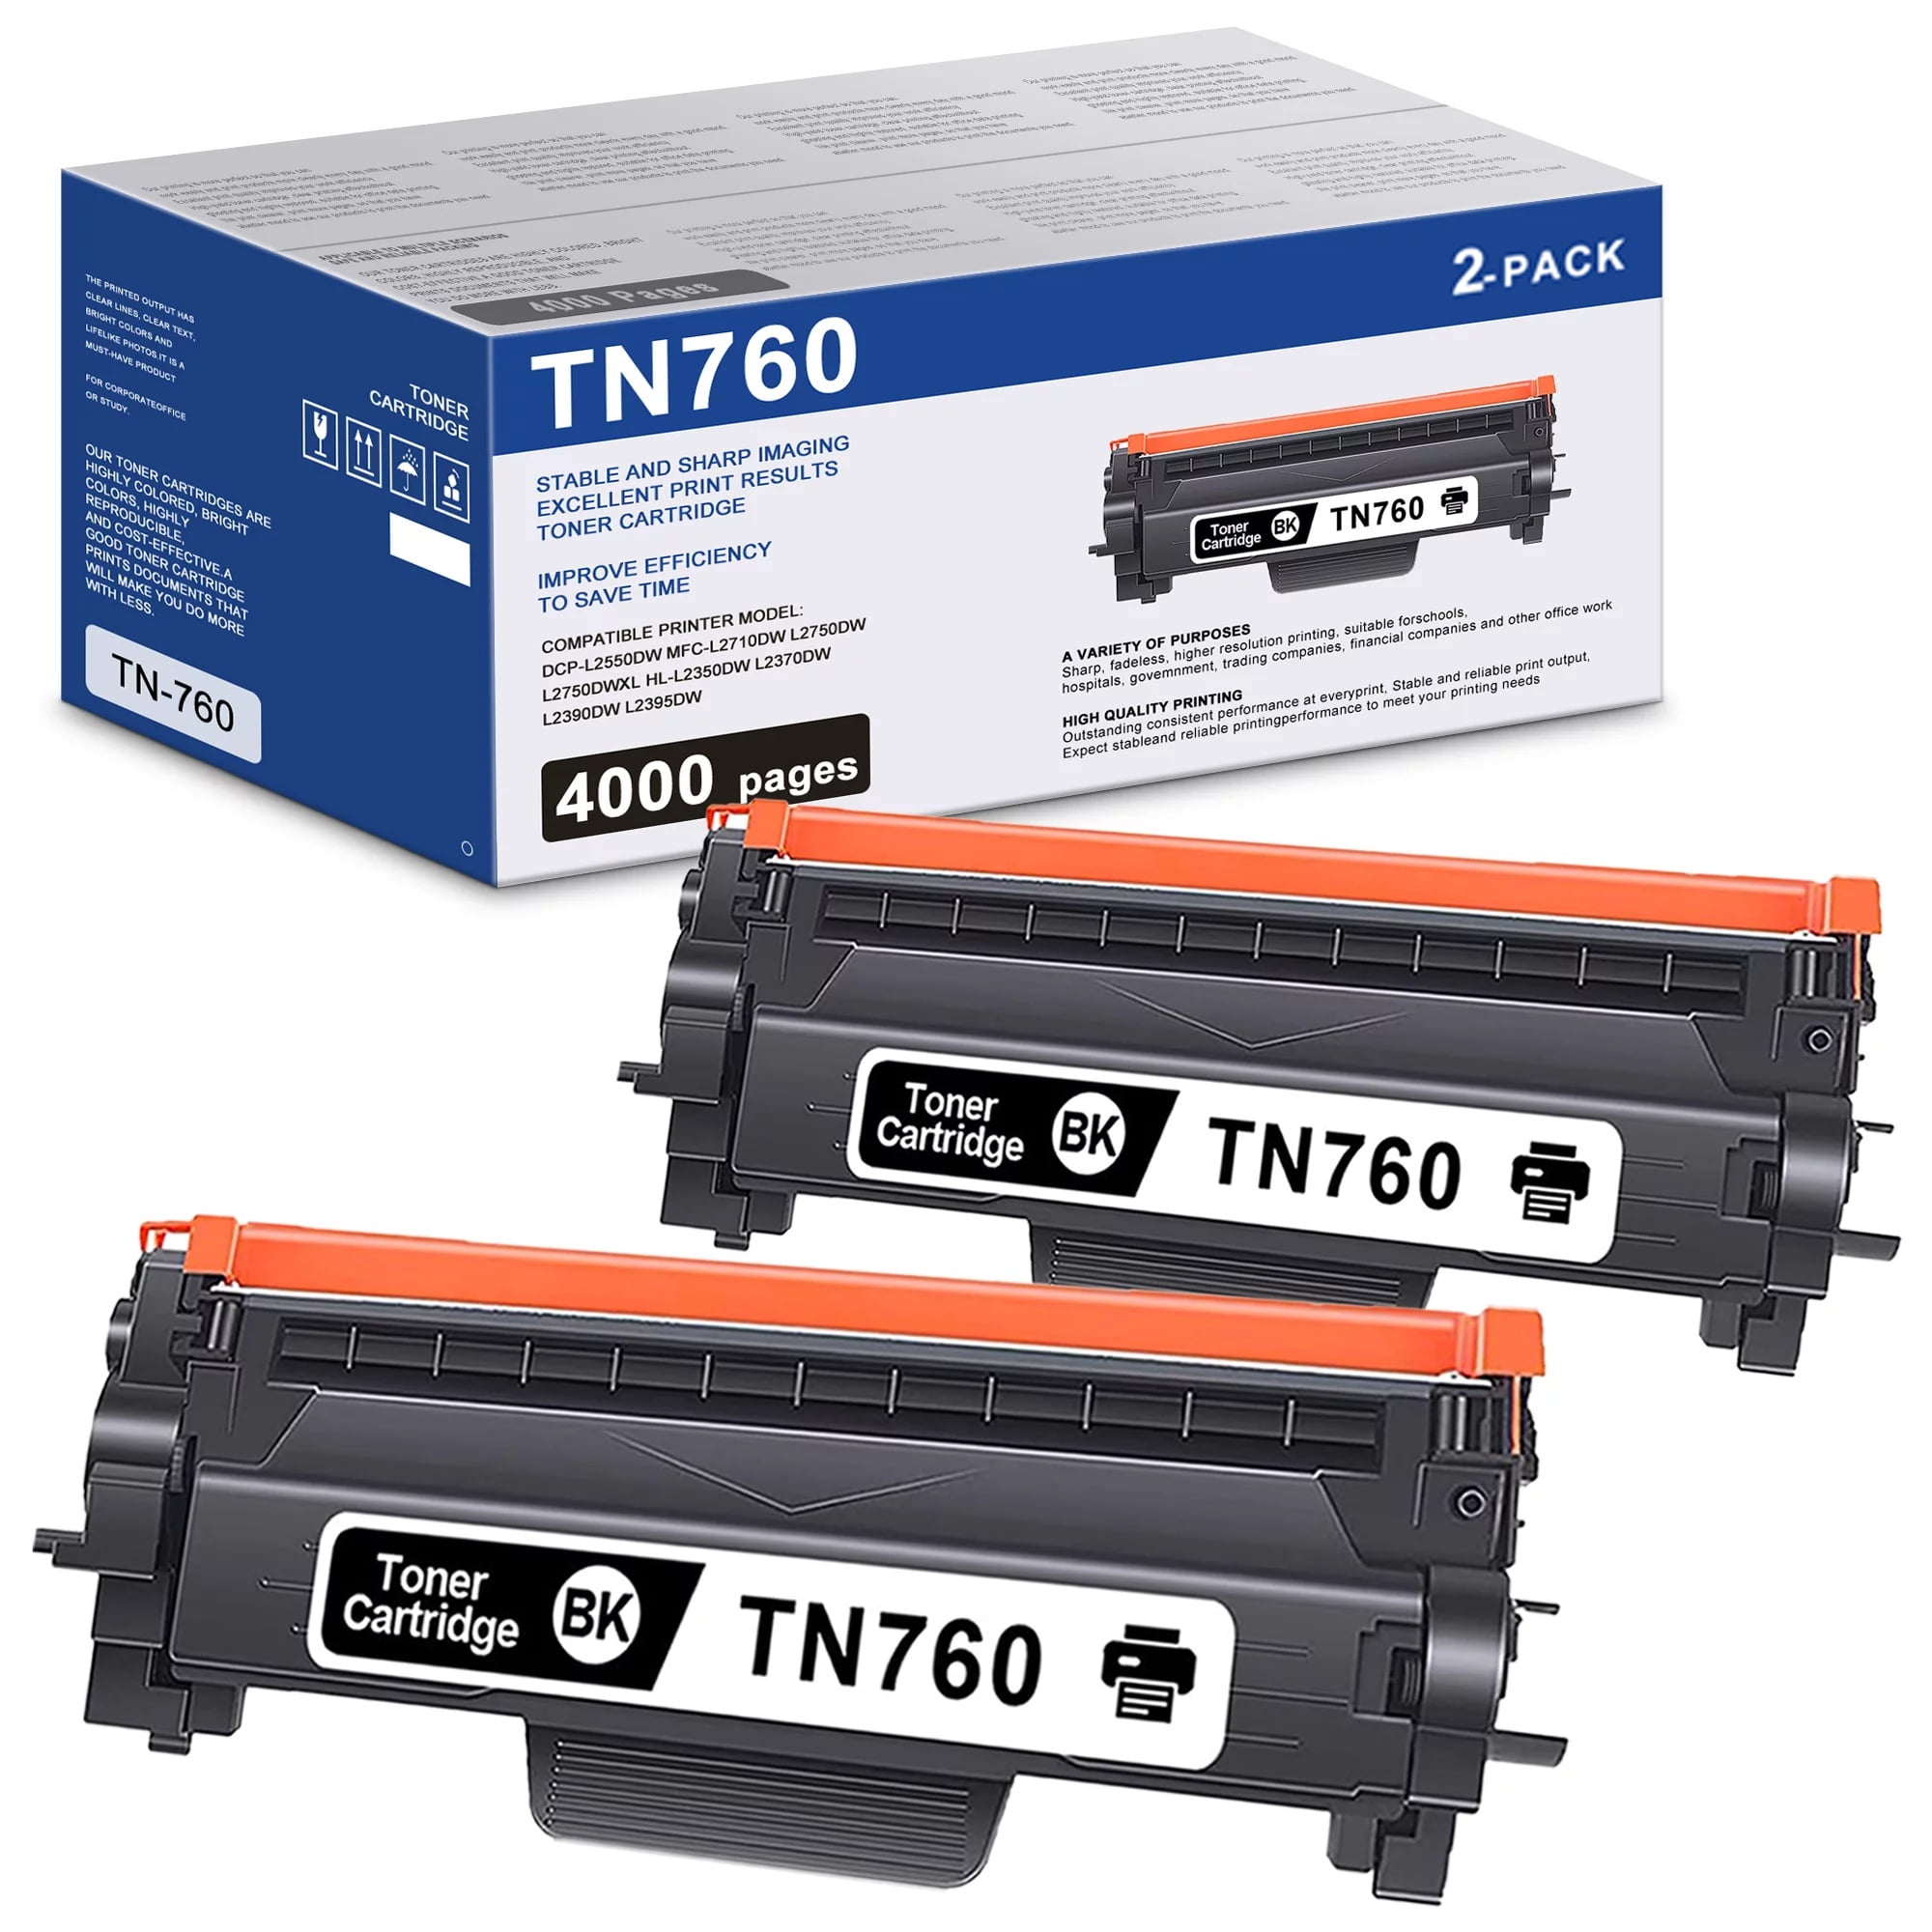 TN760 Black Toner Cartridge, High Yield : Compatible Replacement